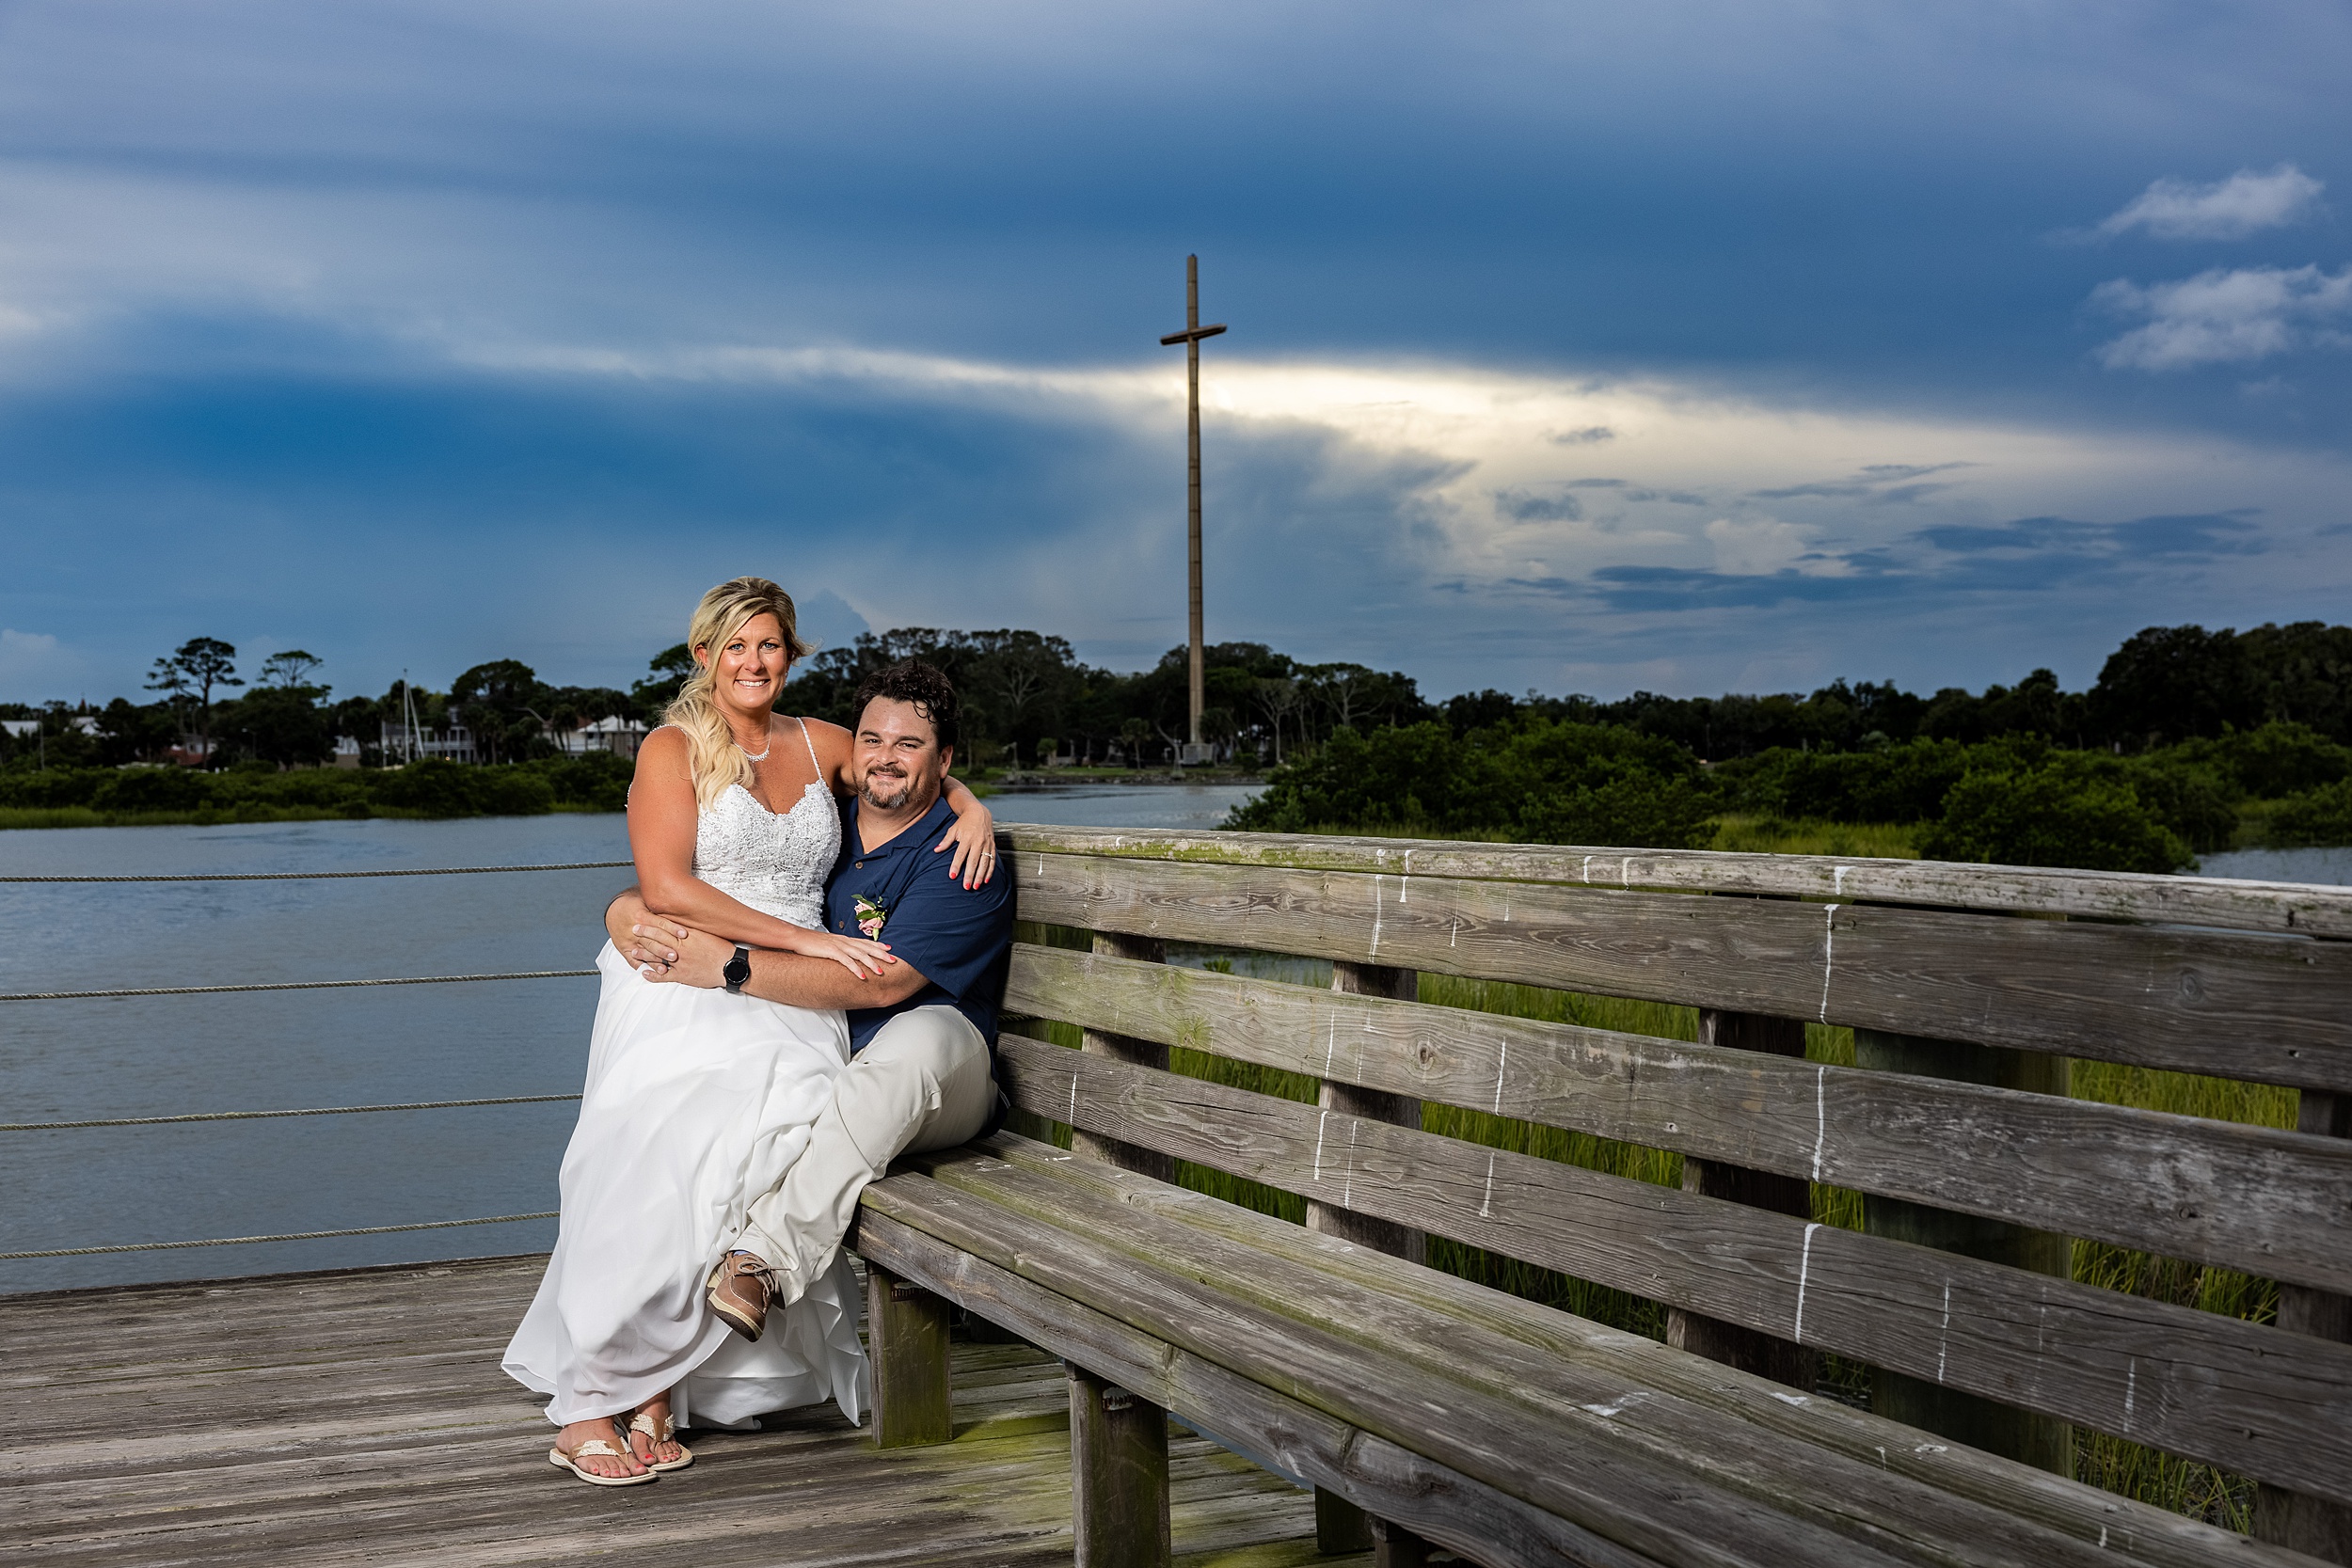 Newlyweds sit on a boardwalk bench at sunset on the river at their fountain of youth wedding